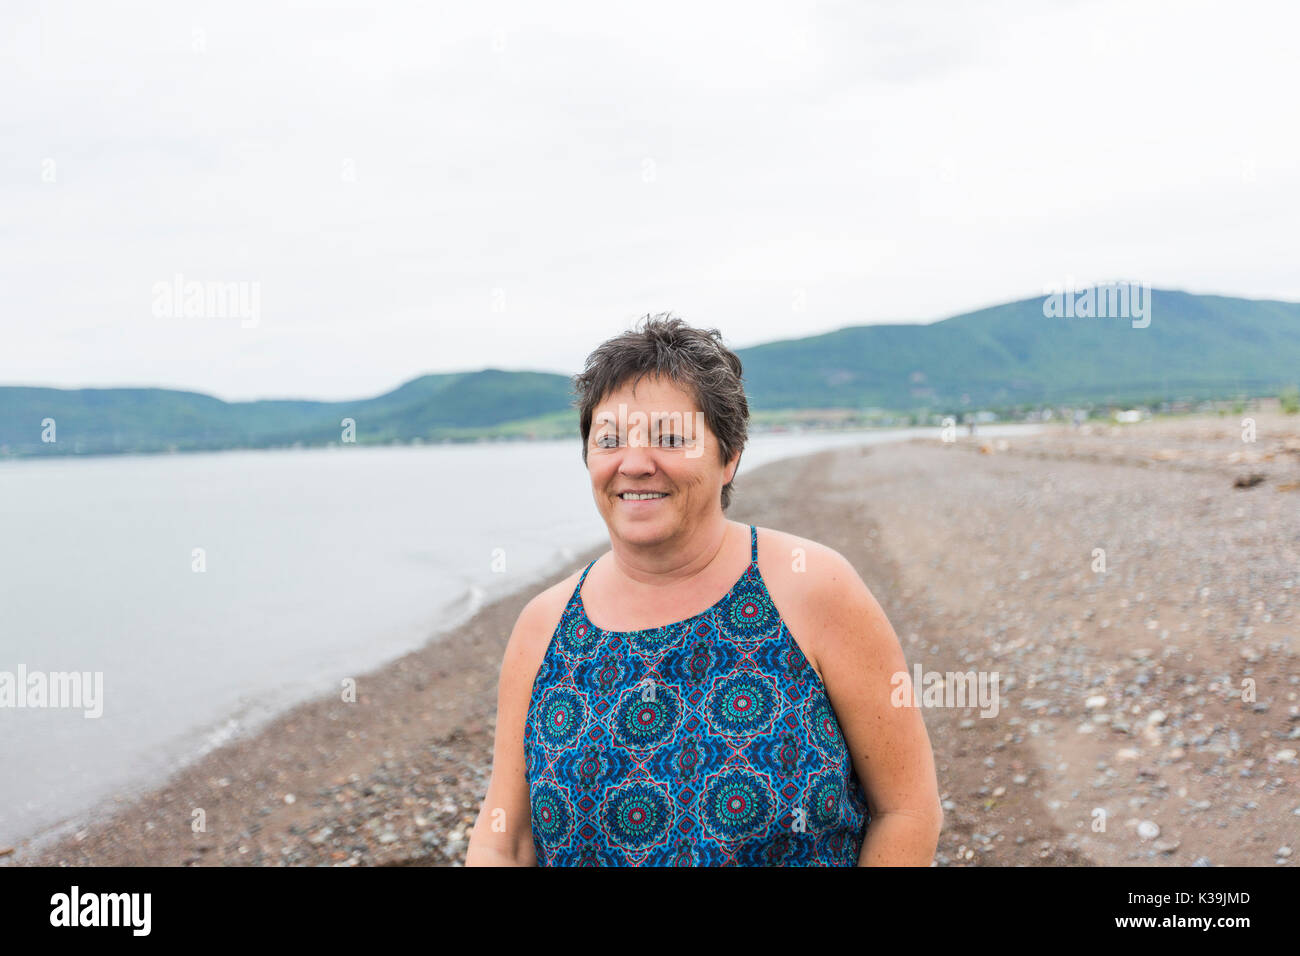 Middle aged woman portrait on the beach Stock Photo